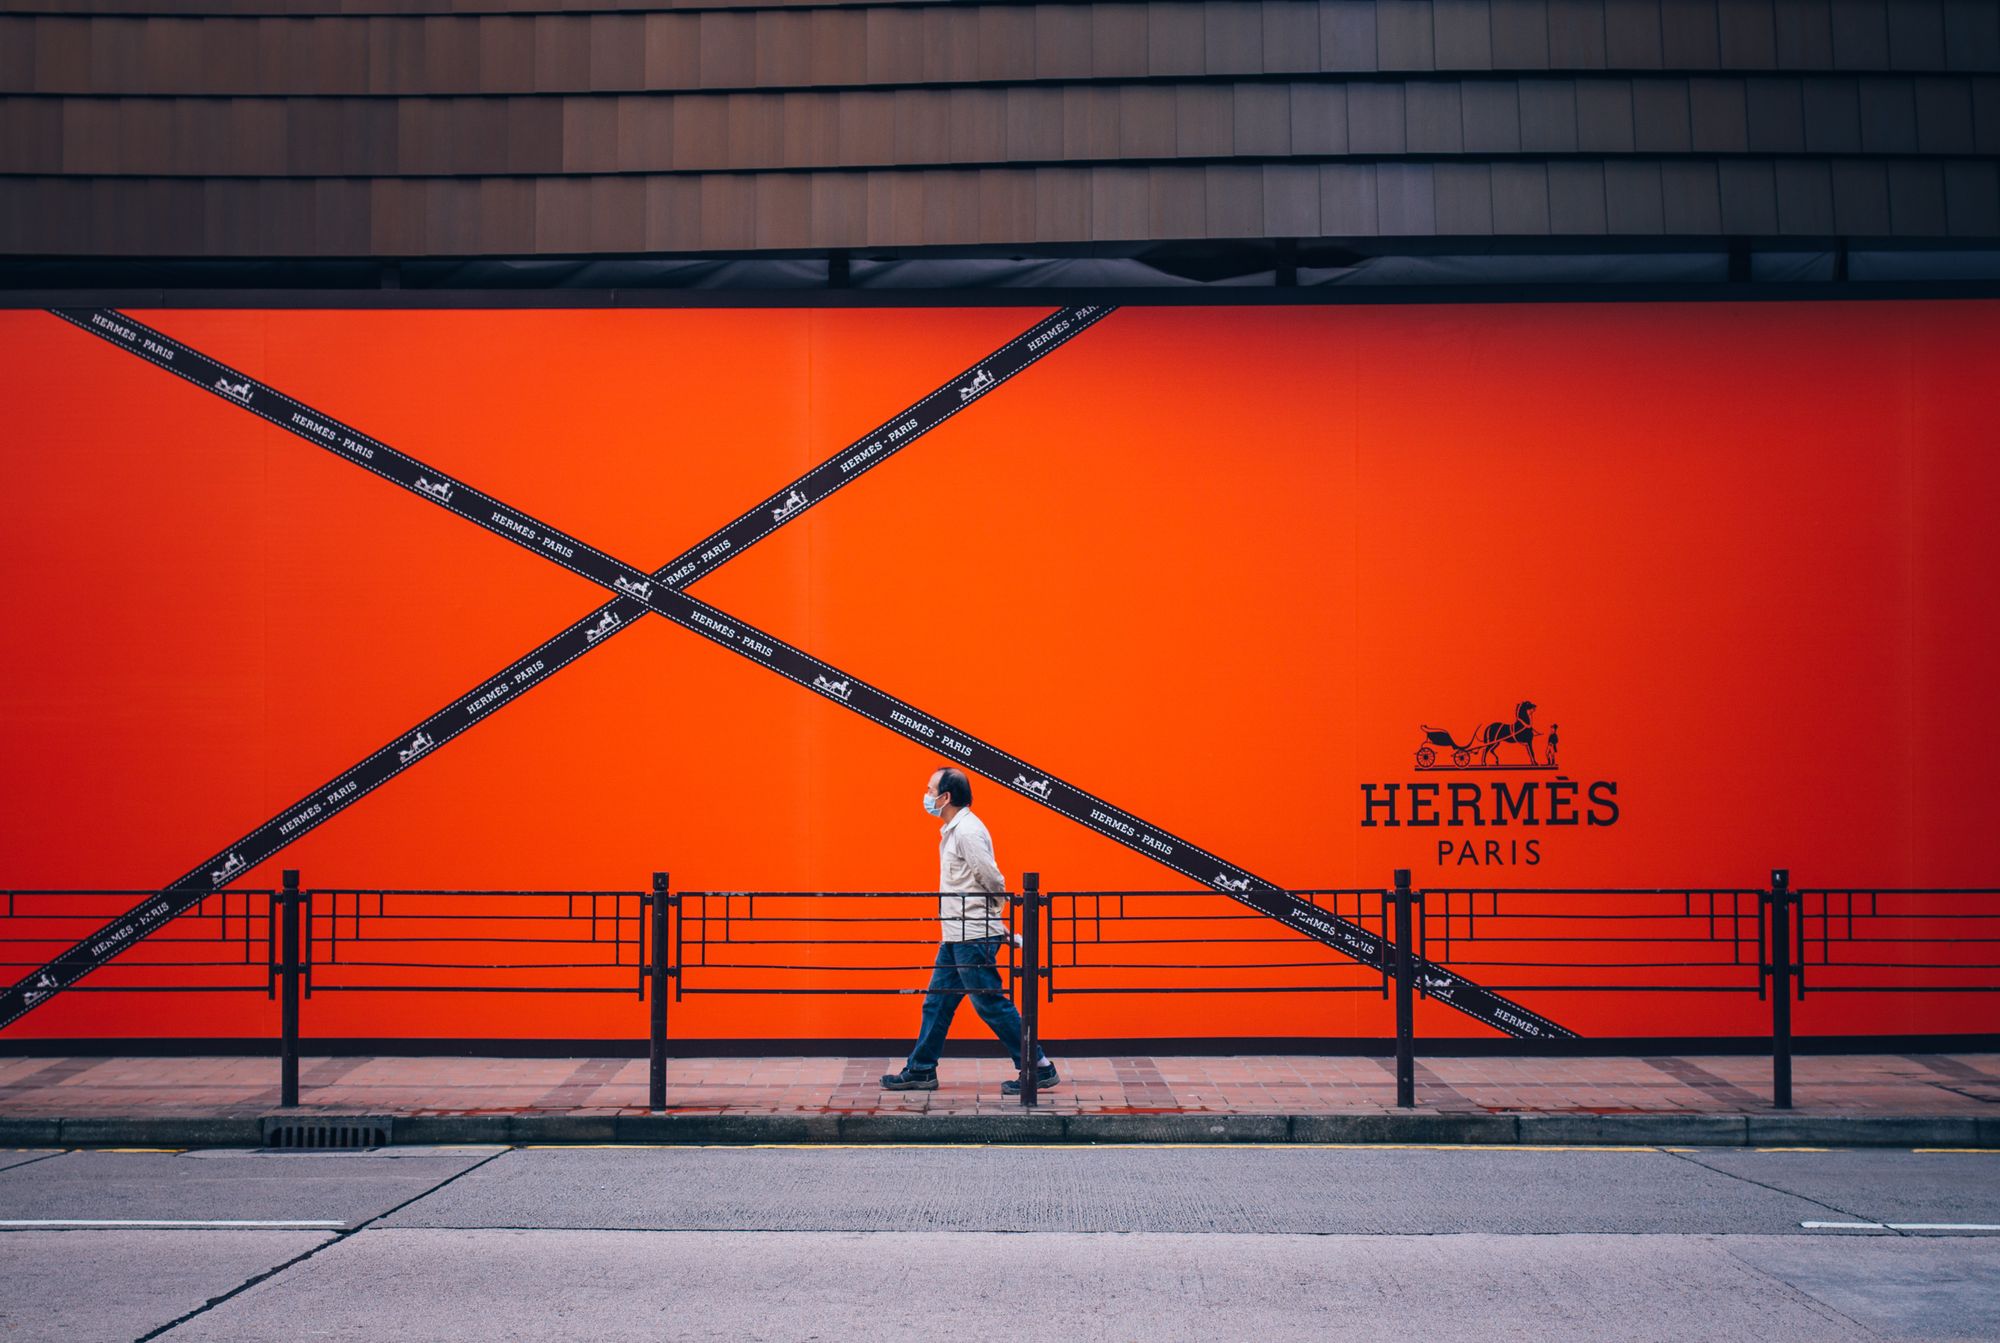 Hermes, A Valuable Luxury Business